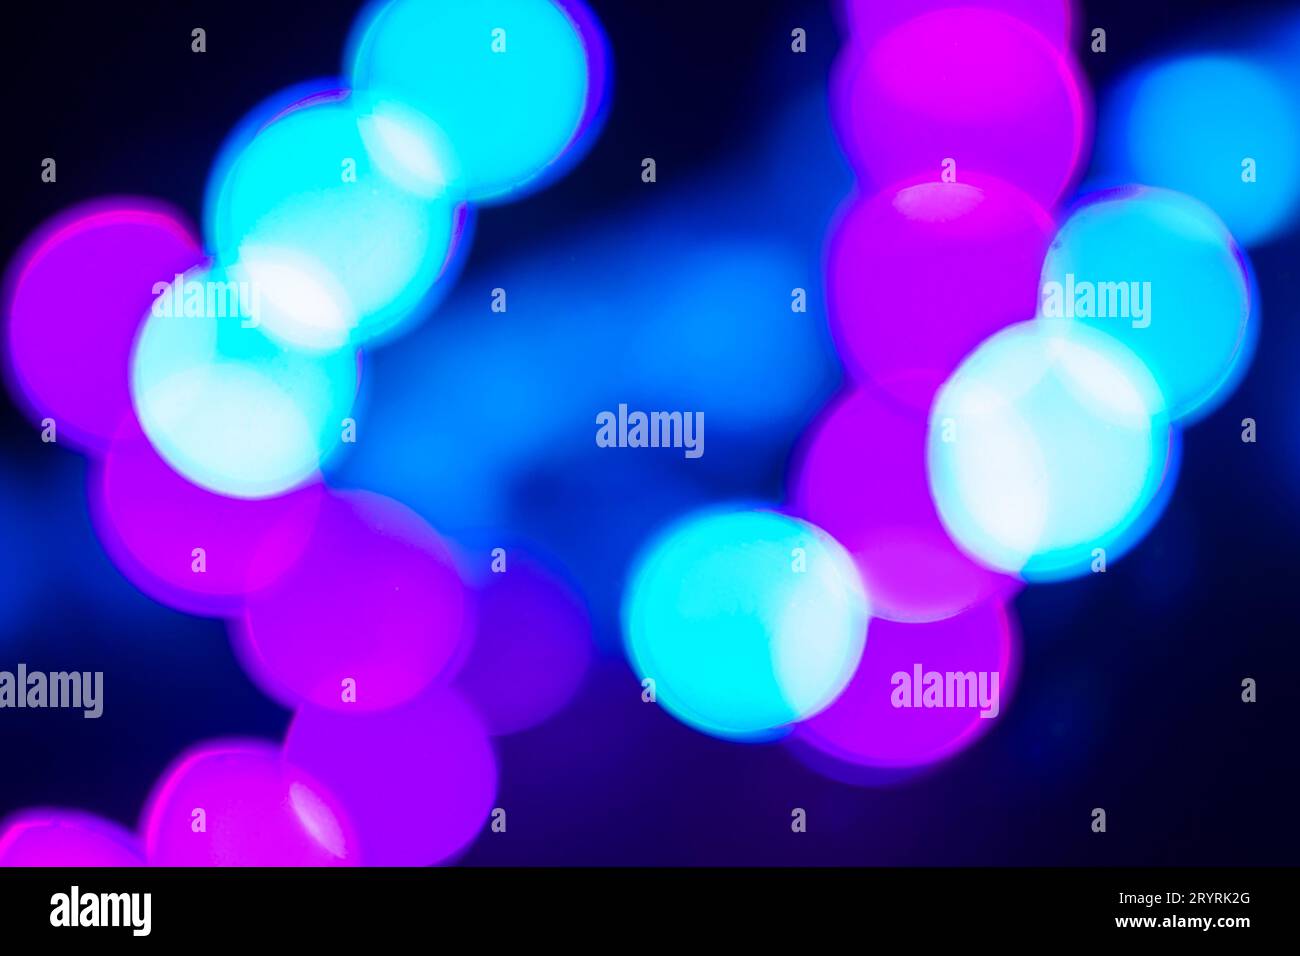 Duotone blue and purple abstraction of blurry neon lights on black Stock Photo